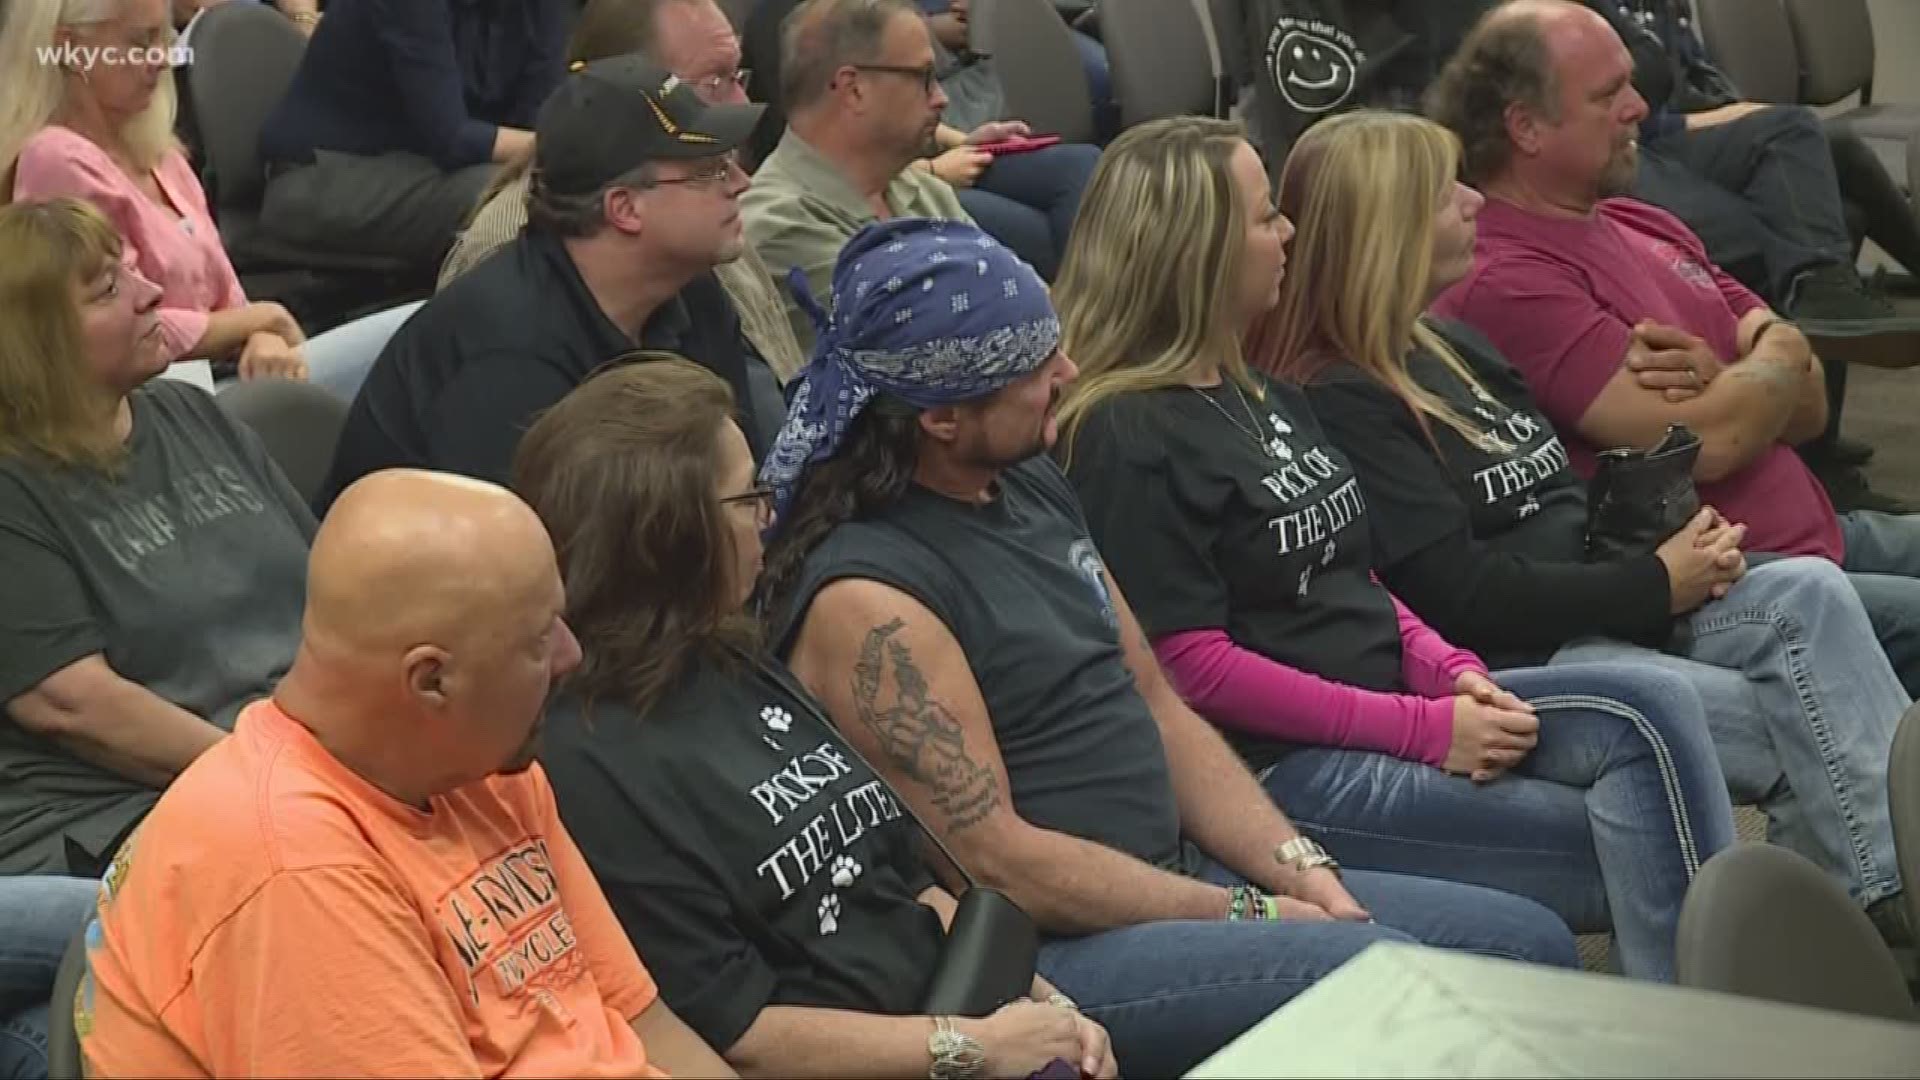 Opponents speak against 'Pick of the Litter pet store' at Strongsville council meeting